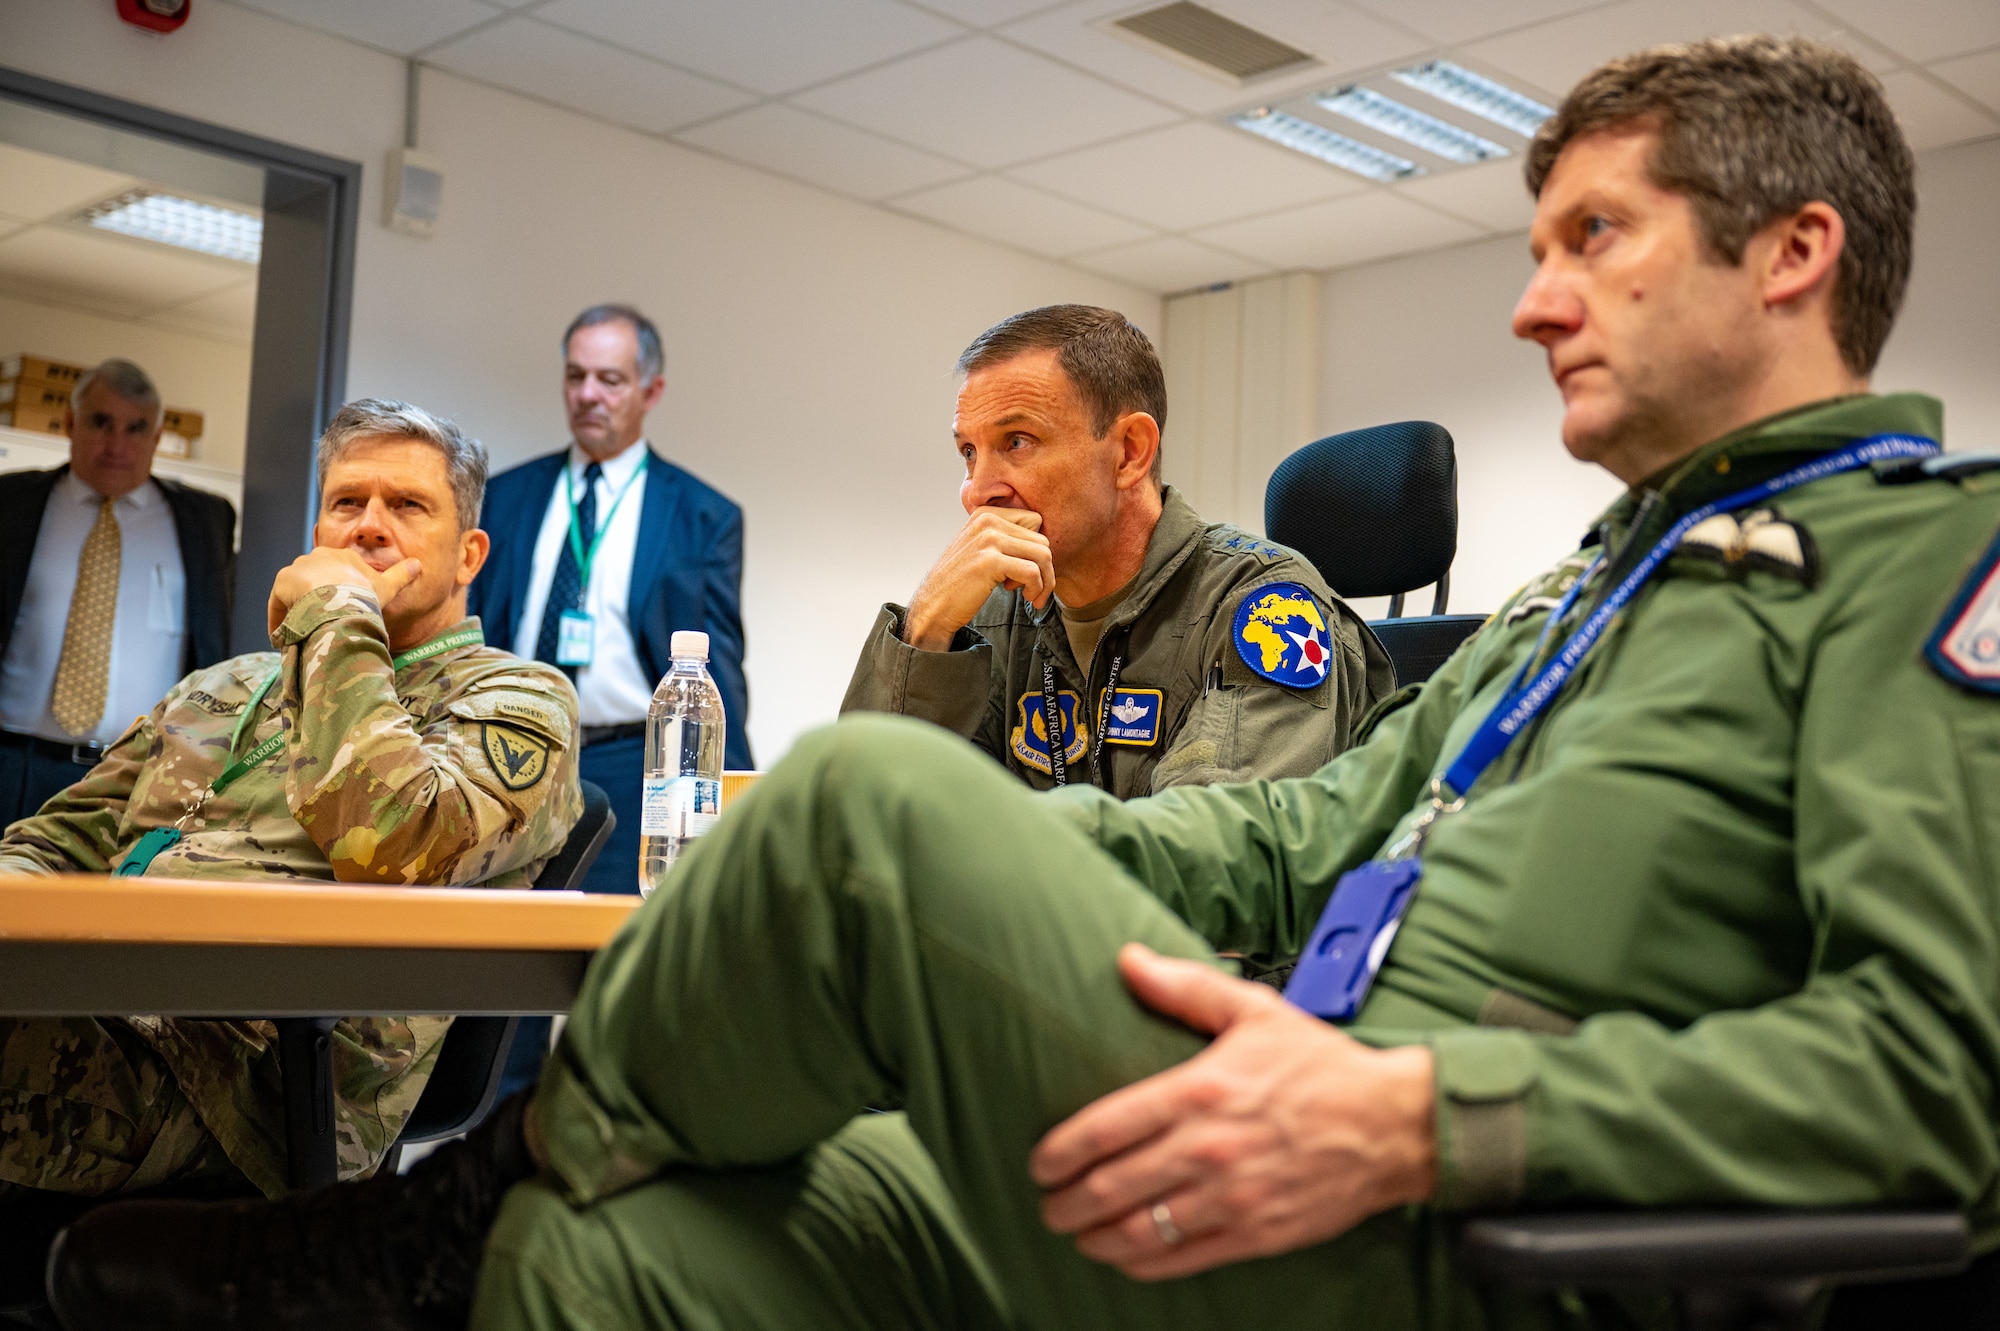 ETB is an experimentation venue where the U.S. and NATO can explore, evaluate and align concepts and strategies to defend Europe from air and missile attacks.